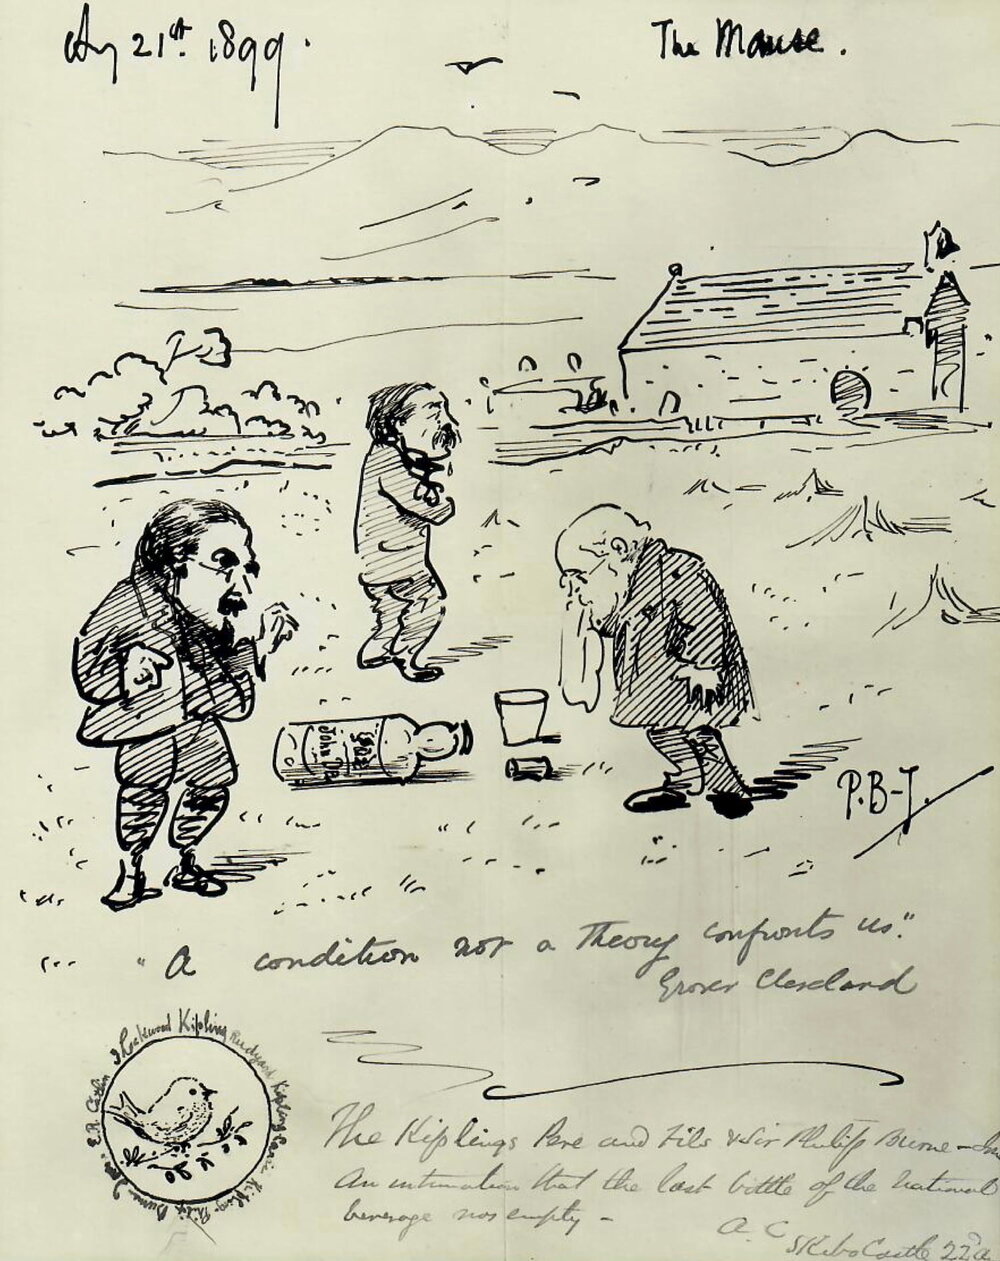  Photograph of a cartoon by Philip Burne-Jones showing three men (Kipling, his father and Burne-Jones) gloomily standing around an empty whisky bottle. (Original is still in the family collection) 